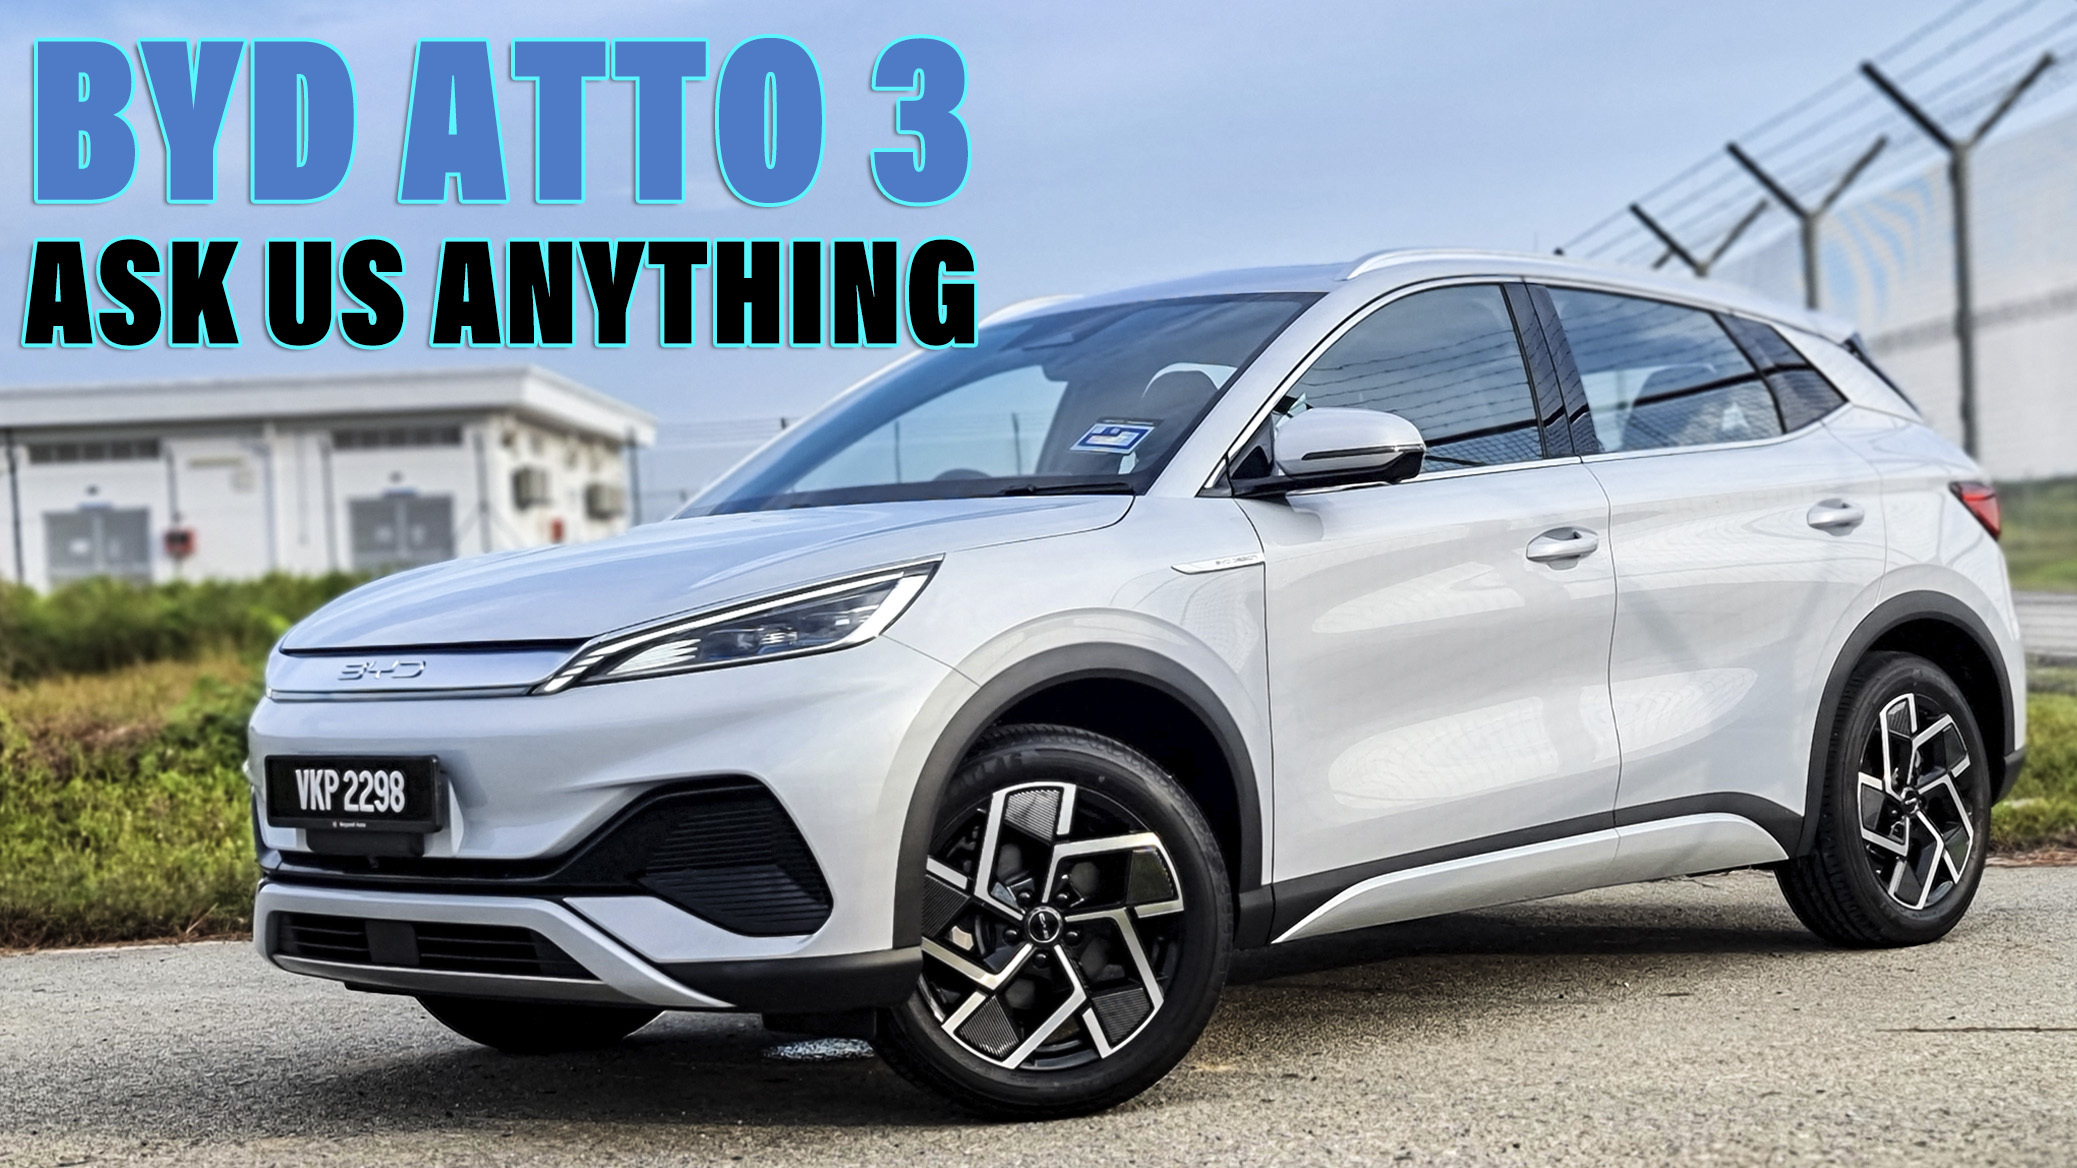 We're Driving The BYD Atto 3 EV, What Would You Like To Know?